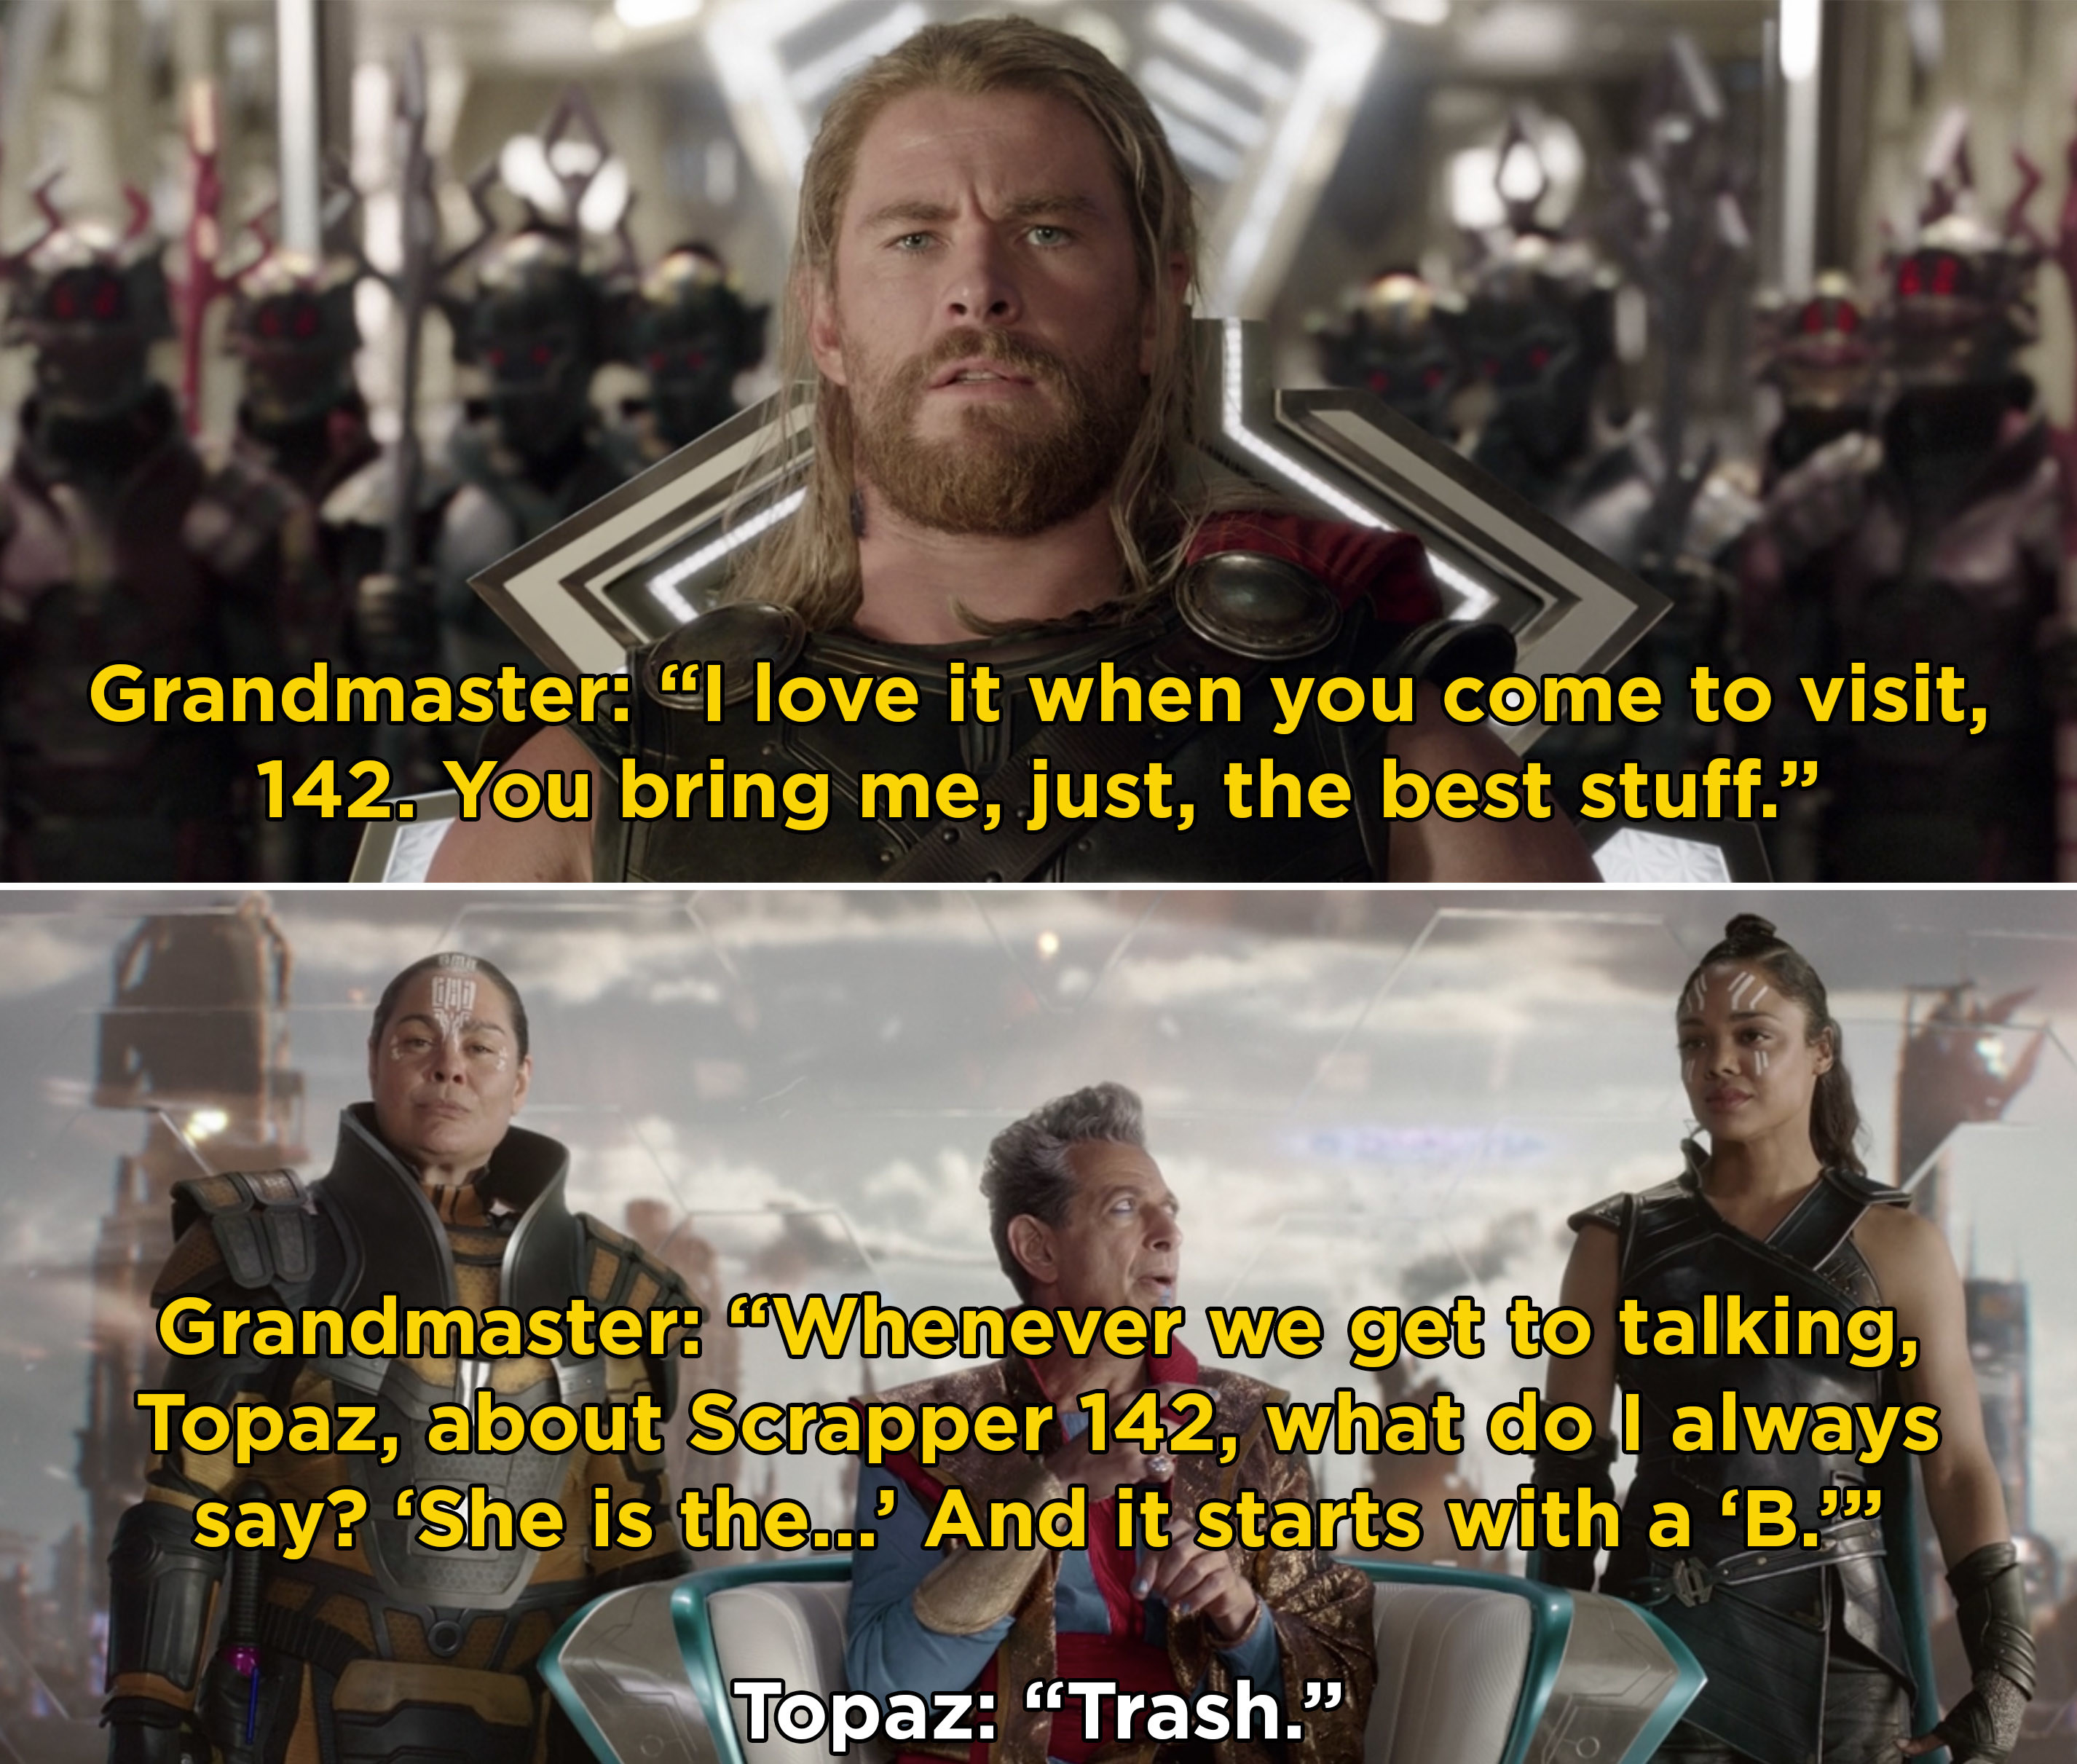 You are not trash you are way beyond their standards - Thor Gift  (thorgift.com) - If you like it please buy some fr…